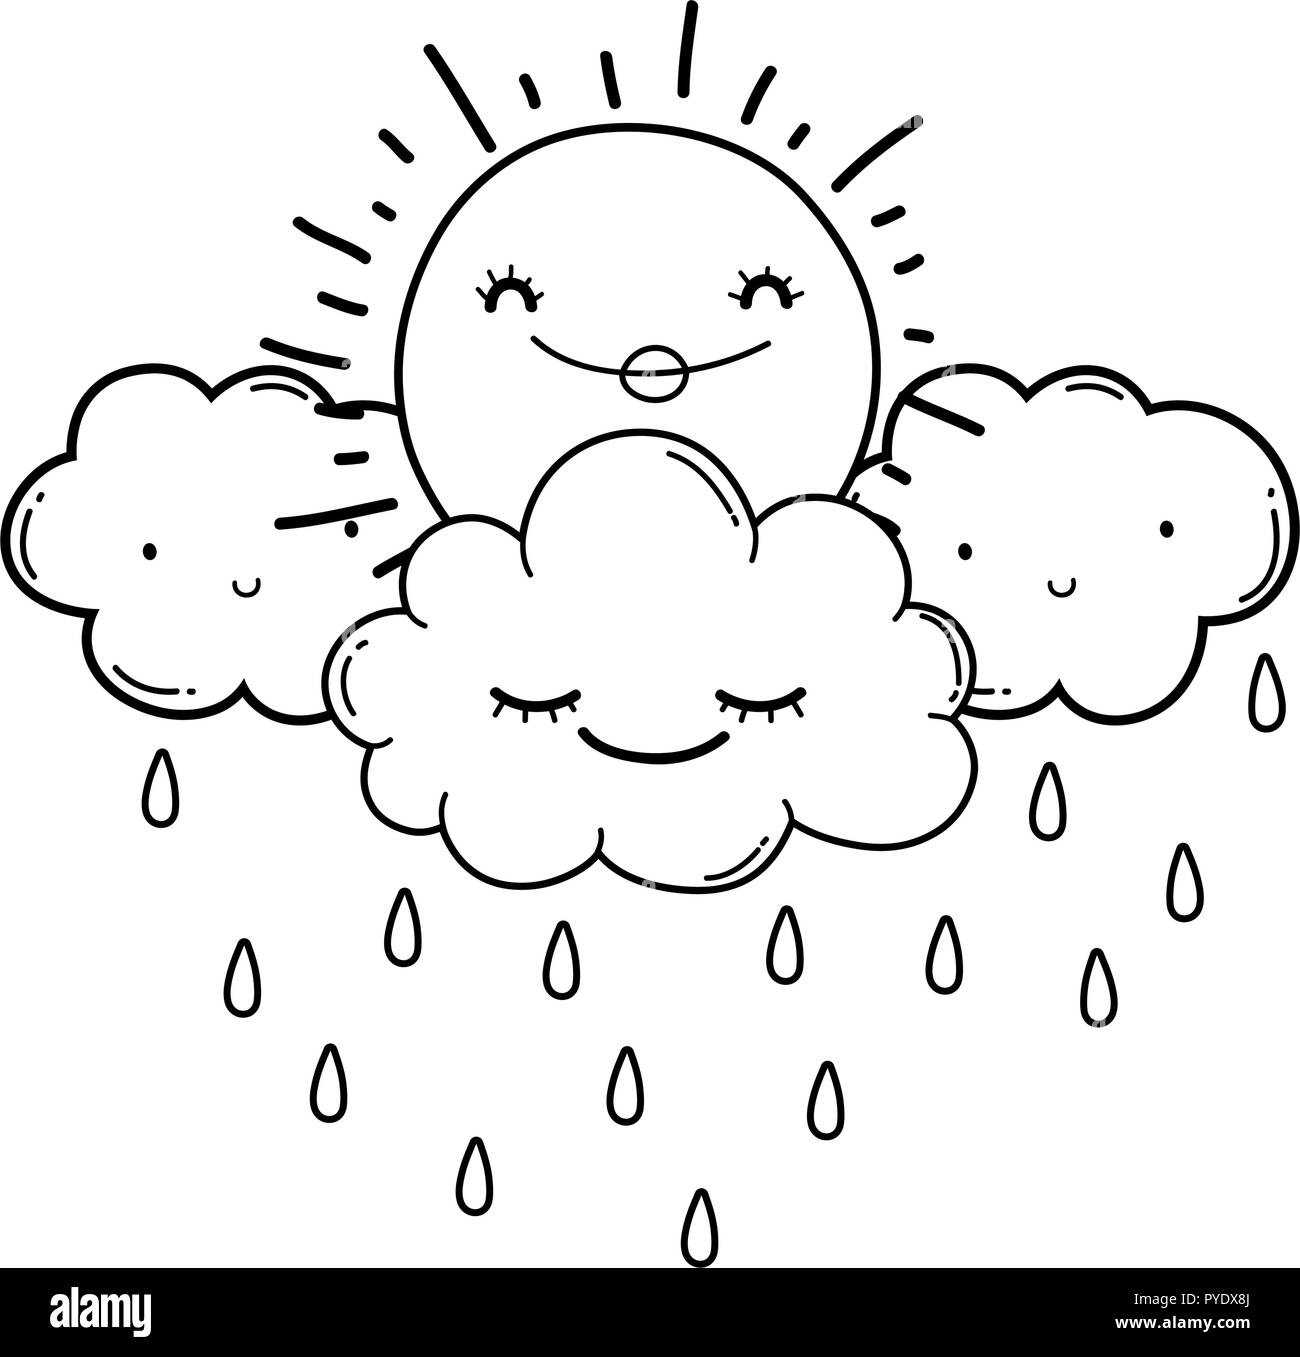 Sun and clouds cartoons in black and white Stock Vector